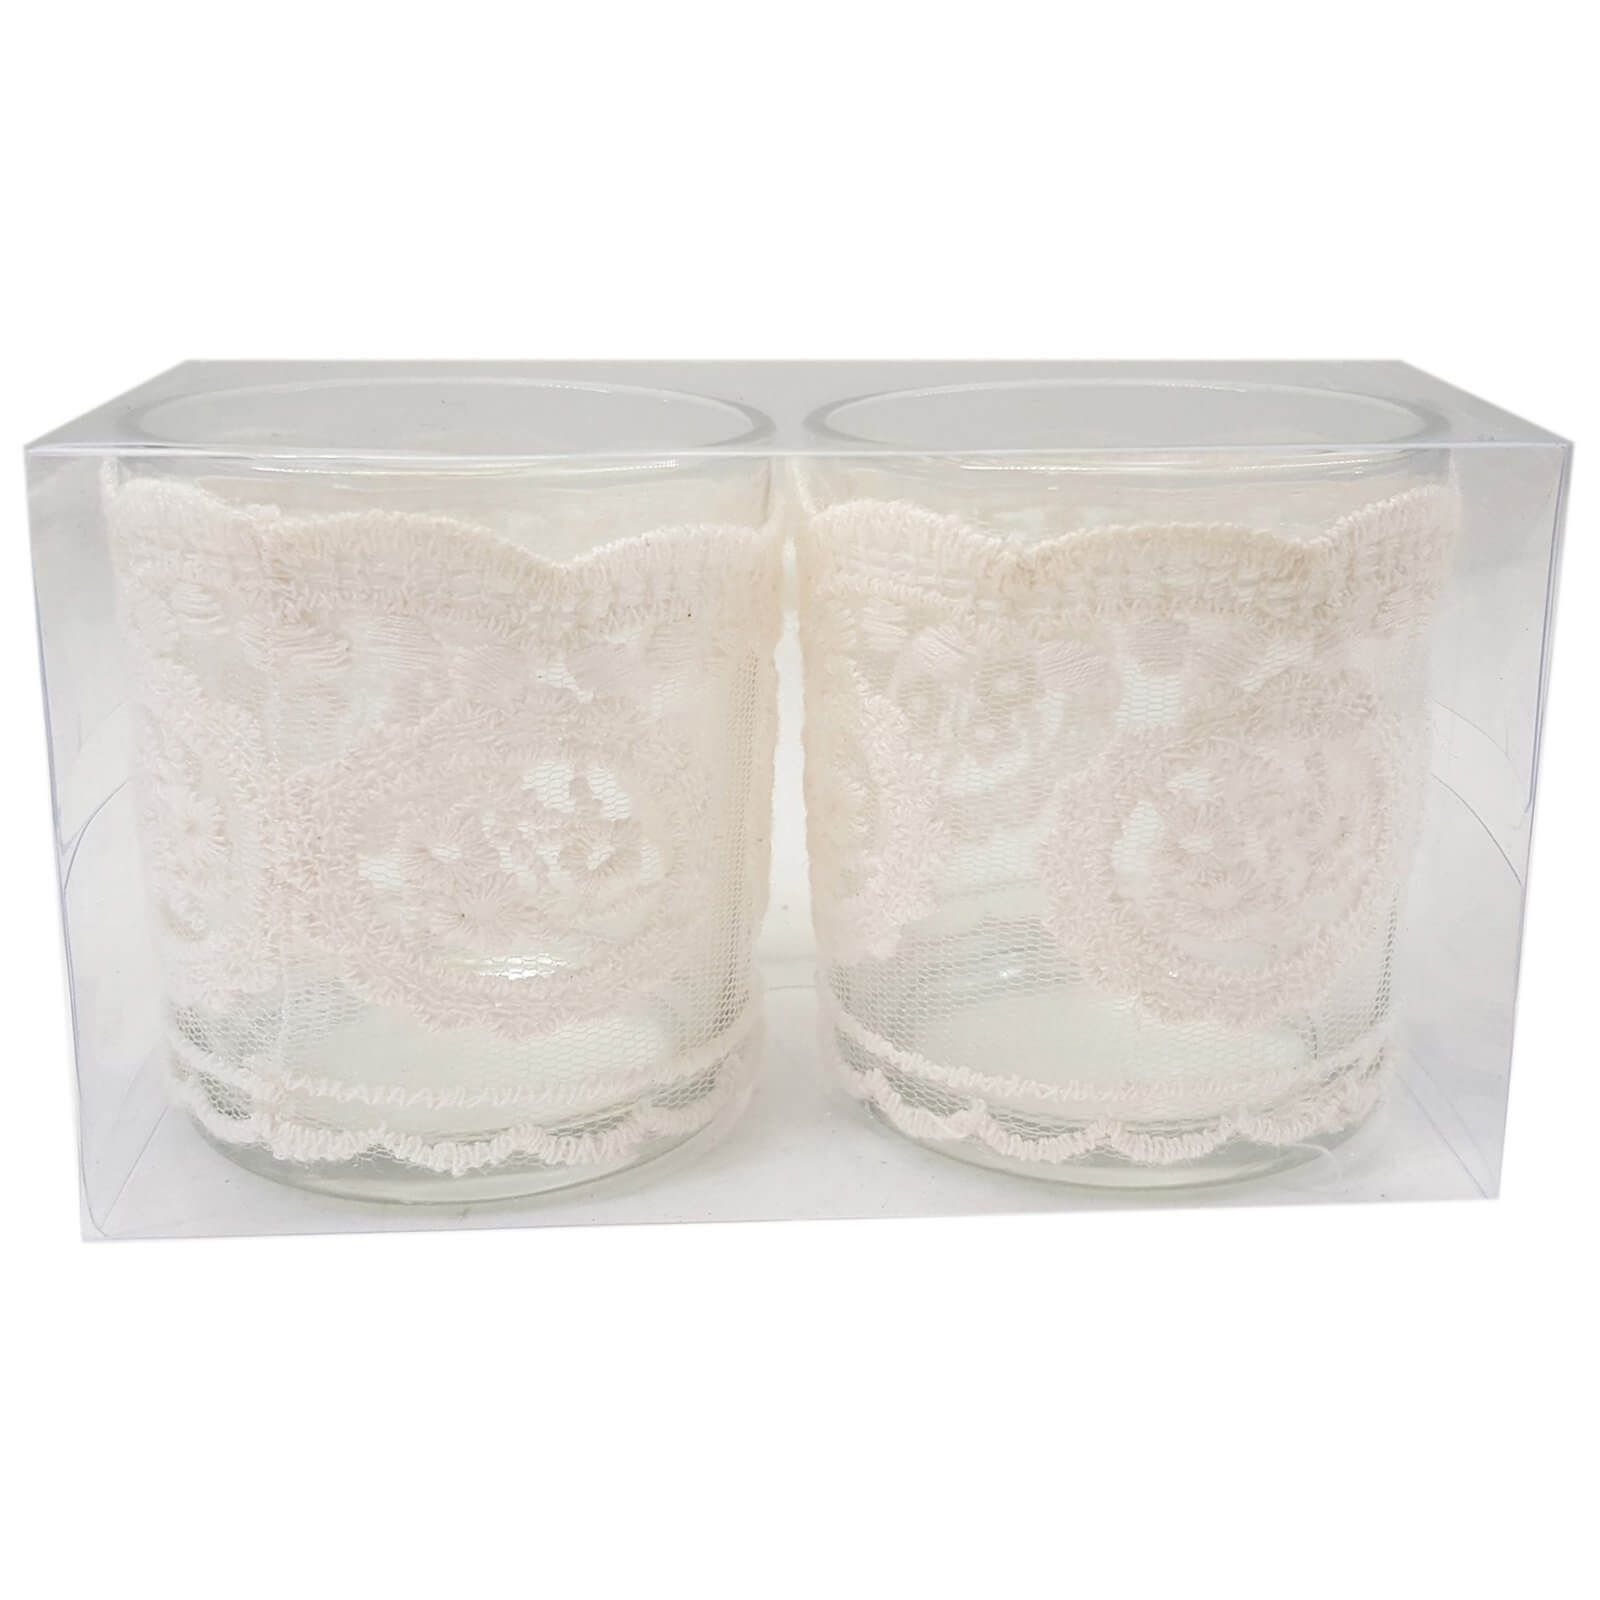 Set of 2 Tealight Candle Holders - Lace